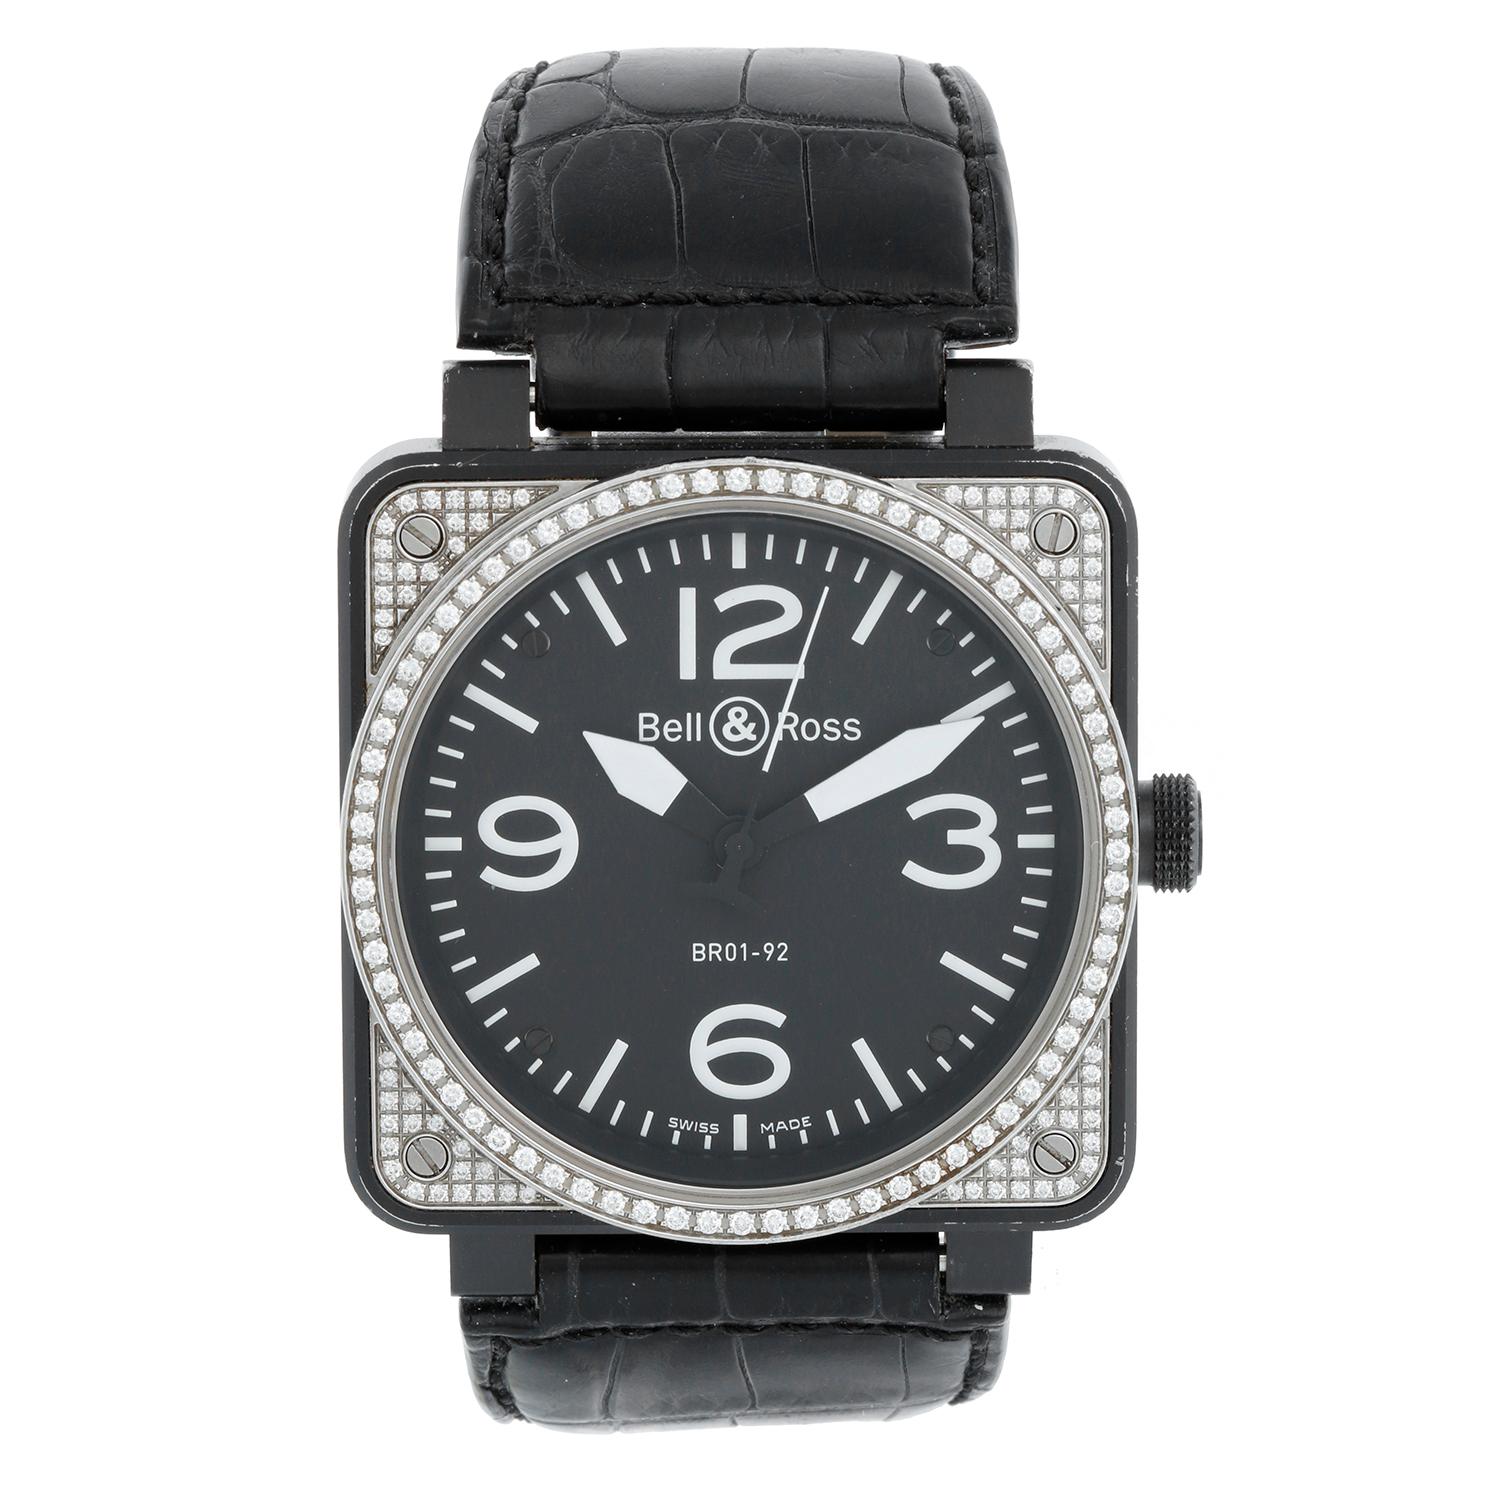 Bell & Ross Stainless Steel Diamond Automatic Mens Watch BR01-92 - Automatic. Stainless steel with Carbon coating; cushion shaped case with diamond bezel ( 46 mm ). Black dial with Arabic and stick numerals. Black leather Bell & Ross Strap with tang